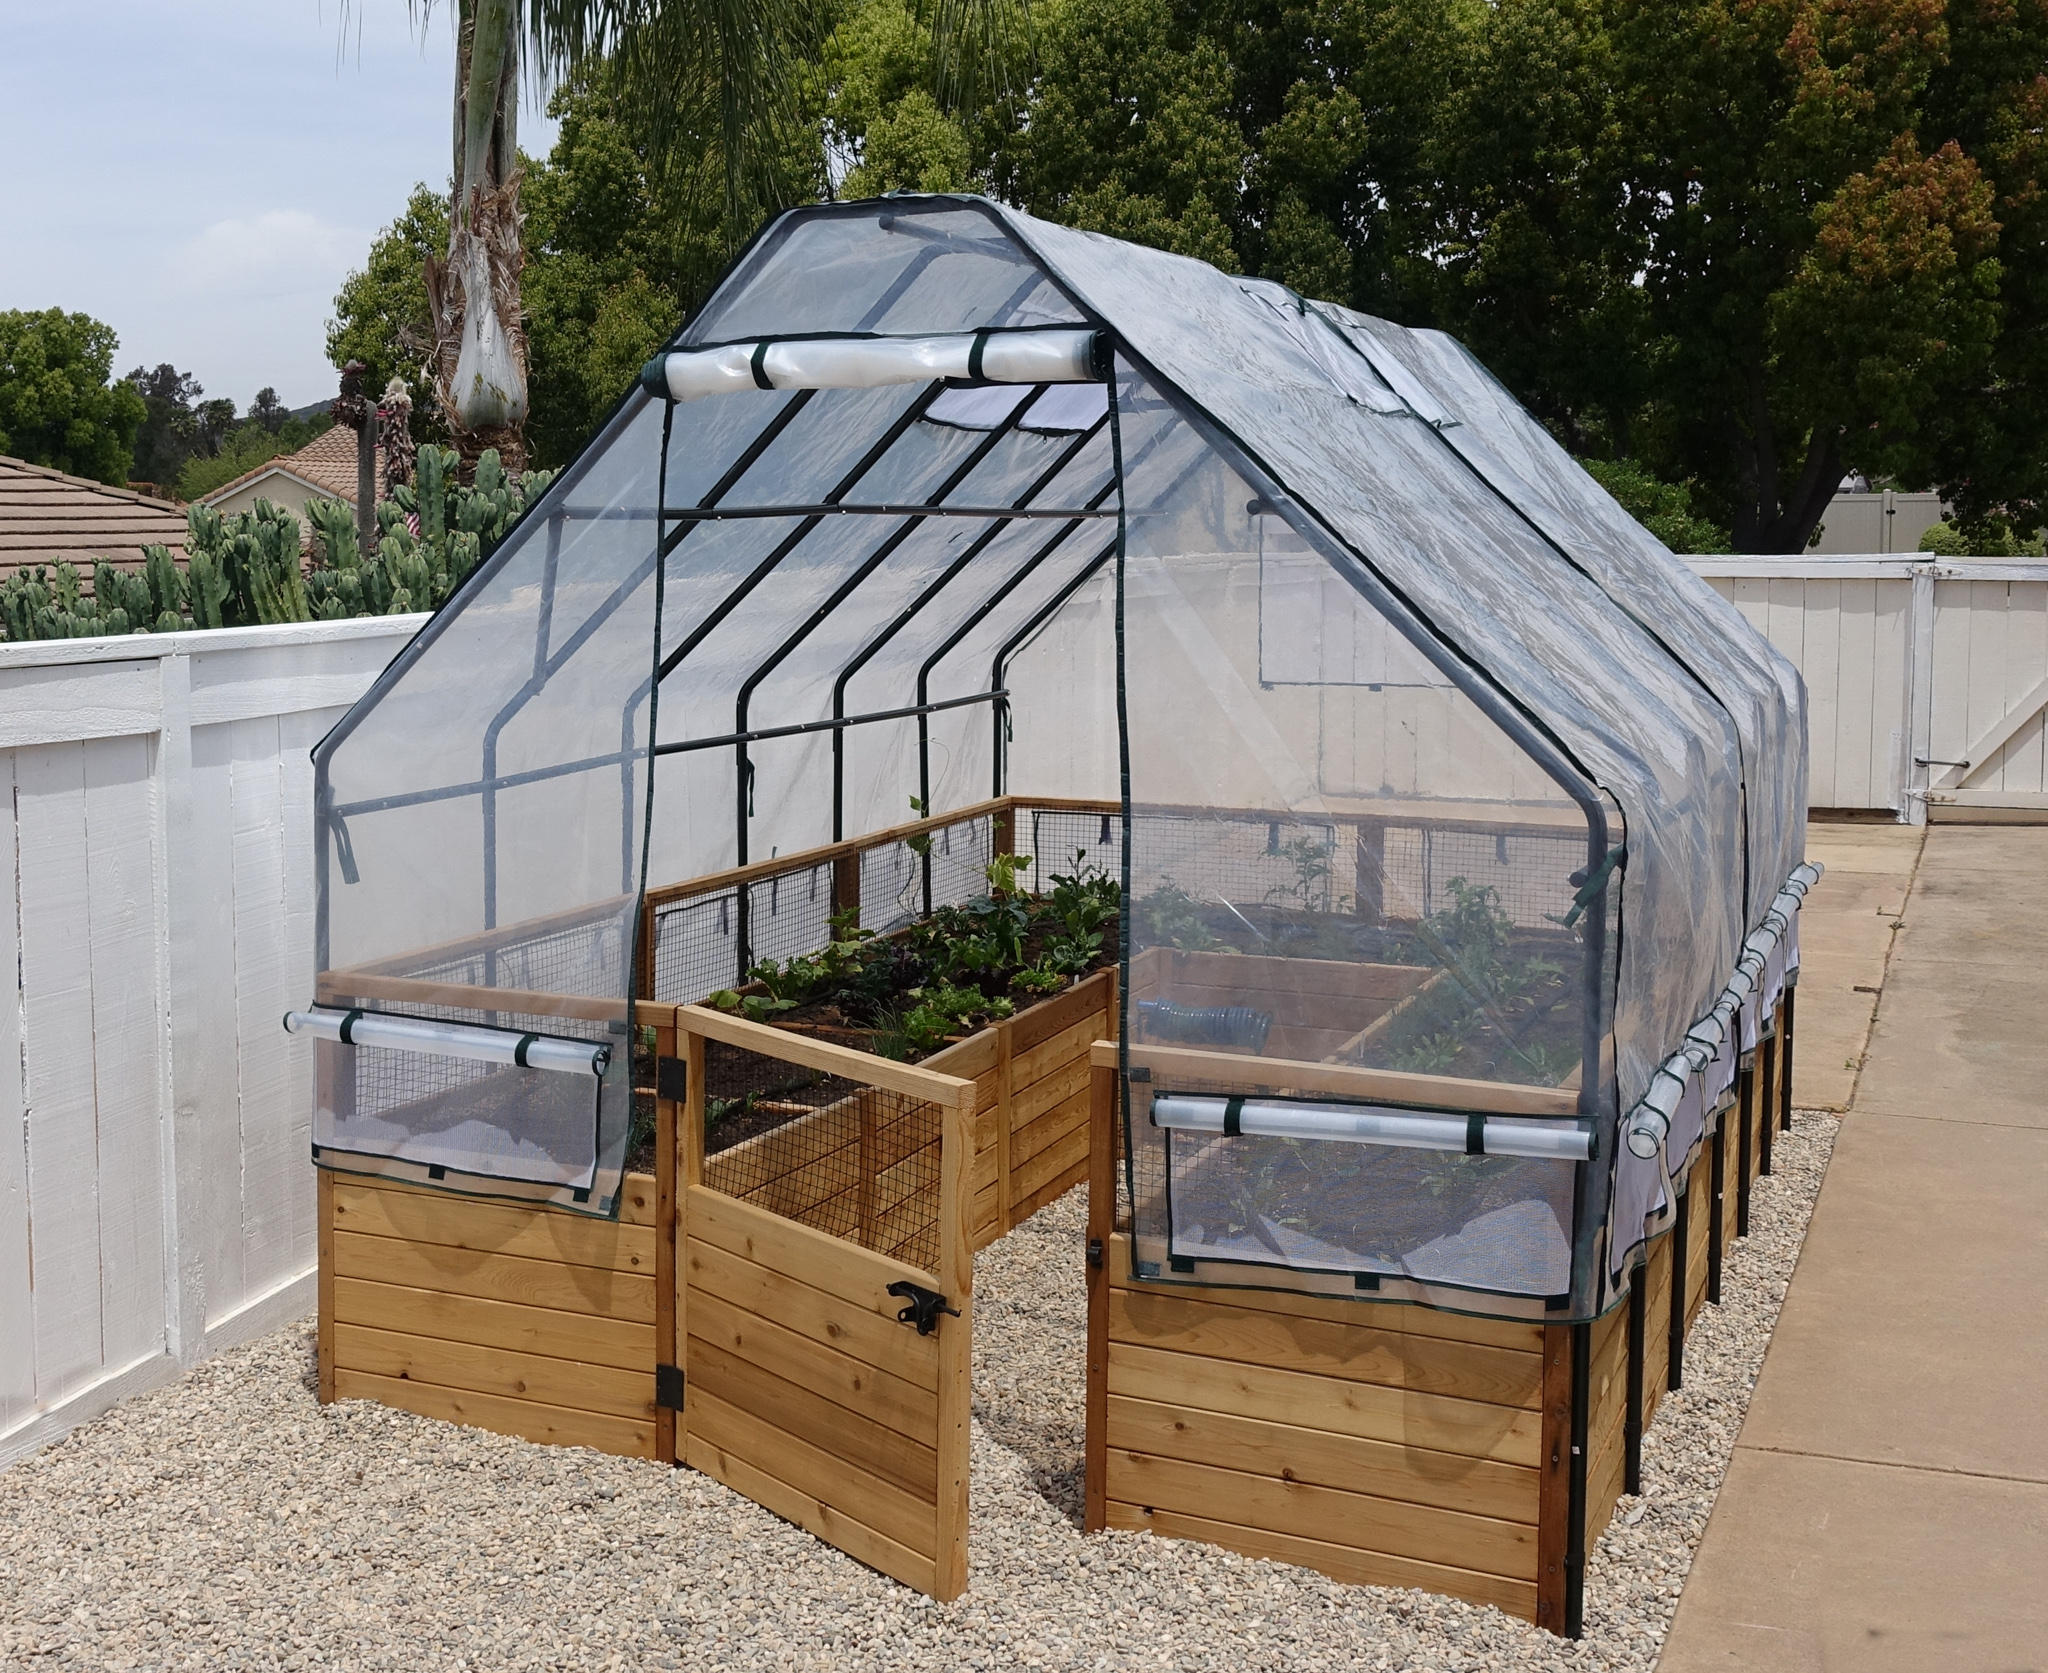 Creating Your Picture-Perfect Garden Oasis with a Greenhouse